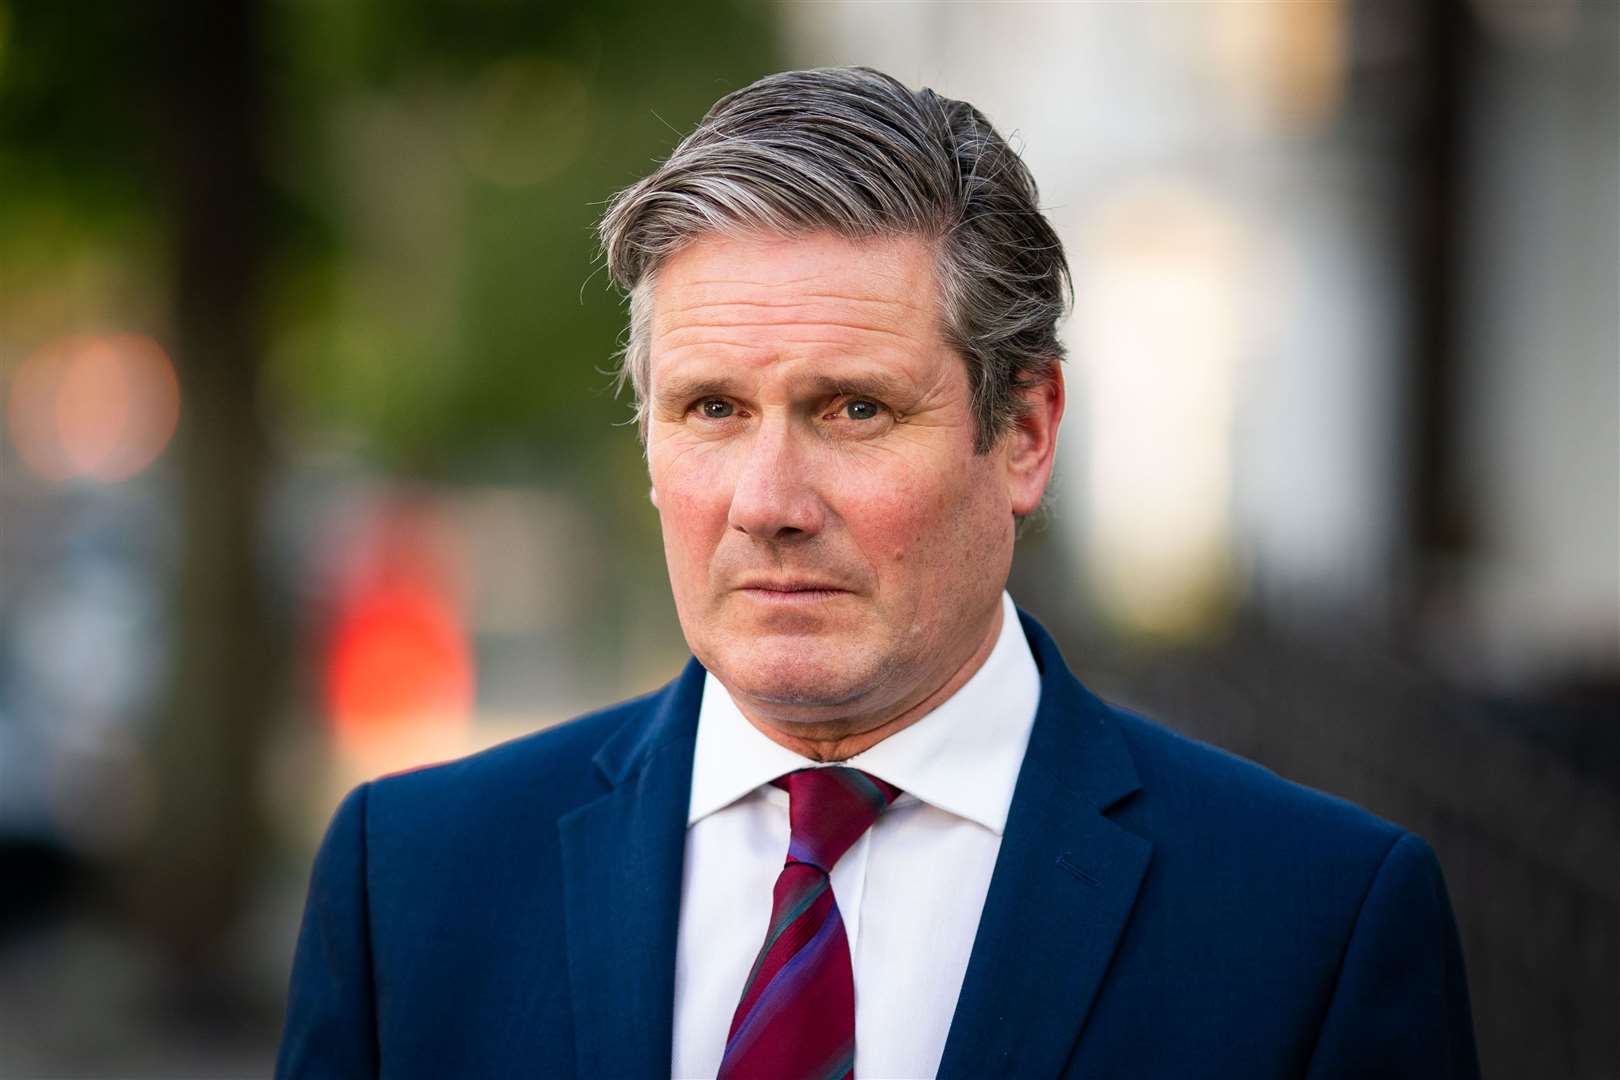 Sir Keir Starmer said he wants to rebuild trust with the Jewish community (Aaron Chown/PA)